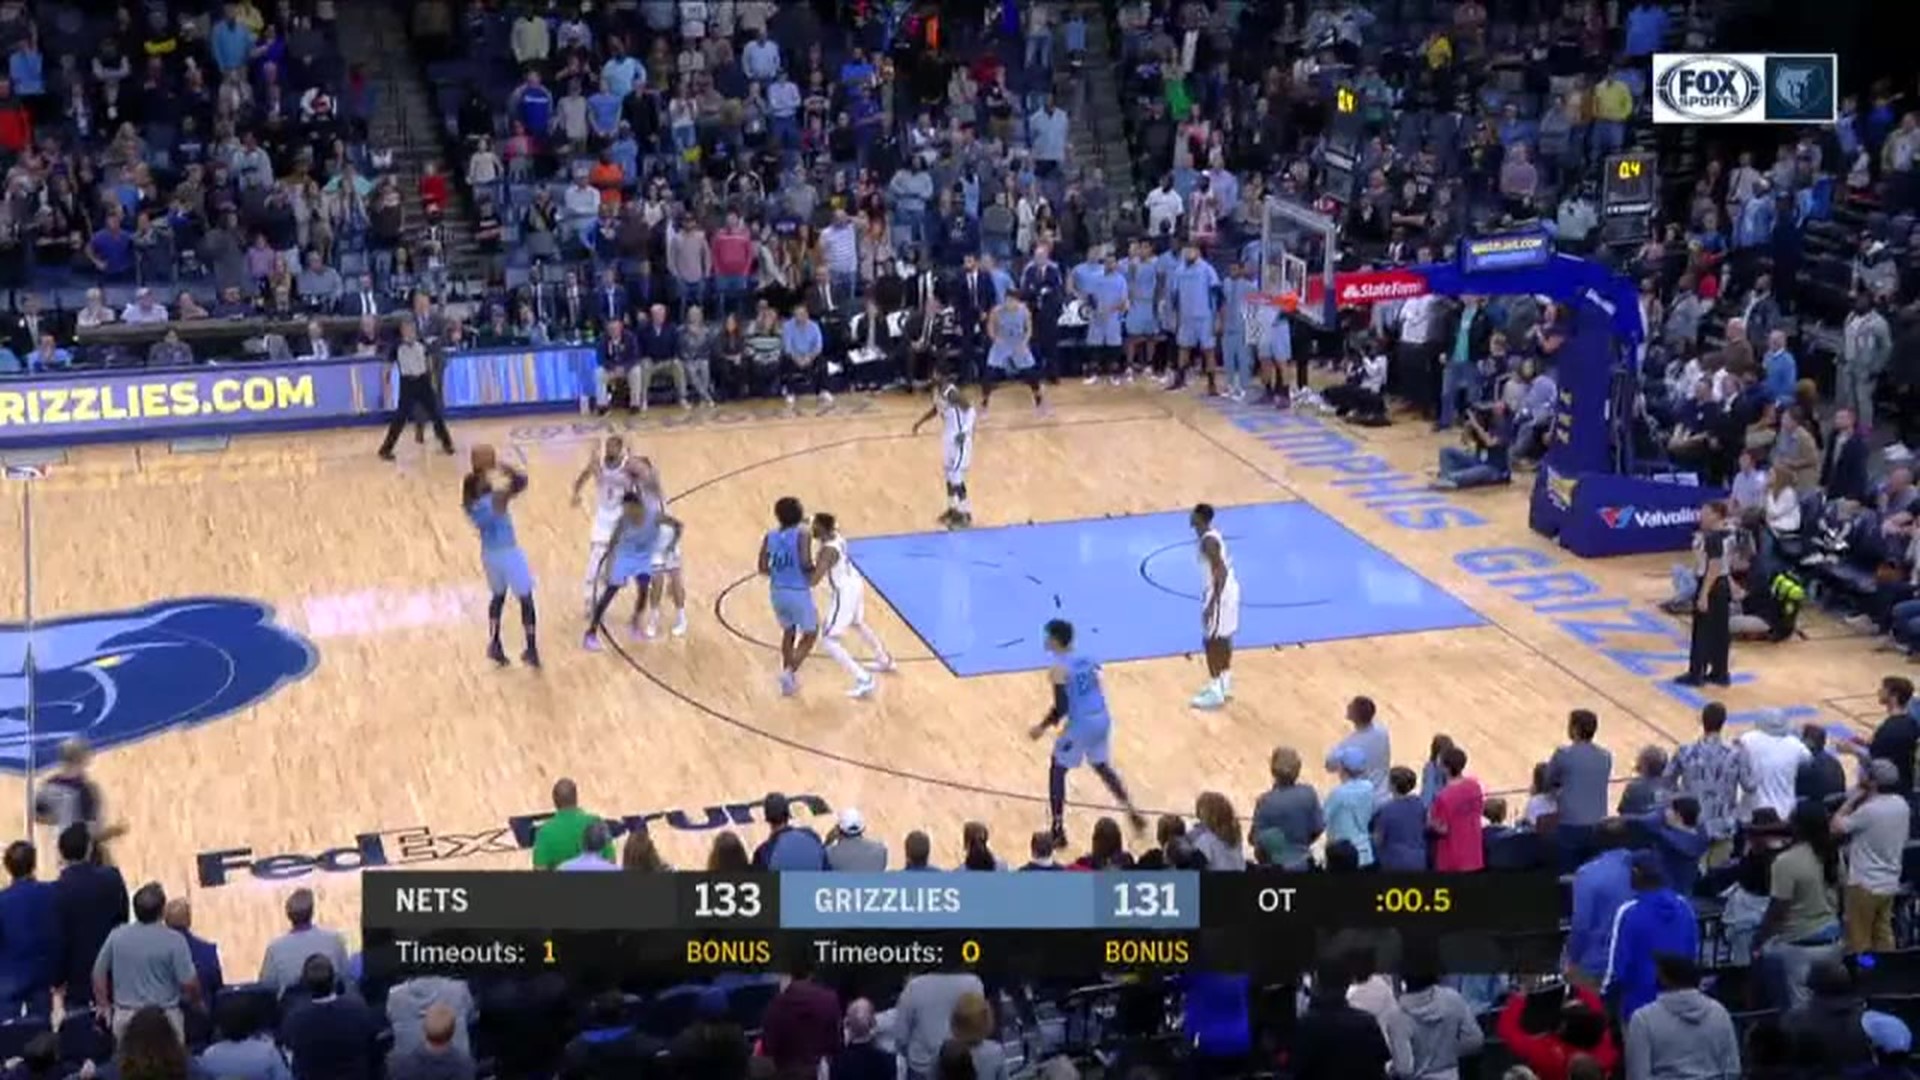 Jae Crowder’s game-winning 3-pointer at the buzzer gives Grizzlies overtime win over the Nets